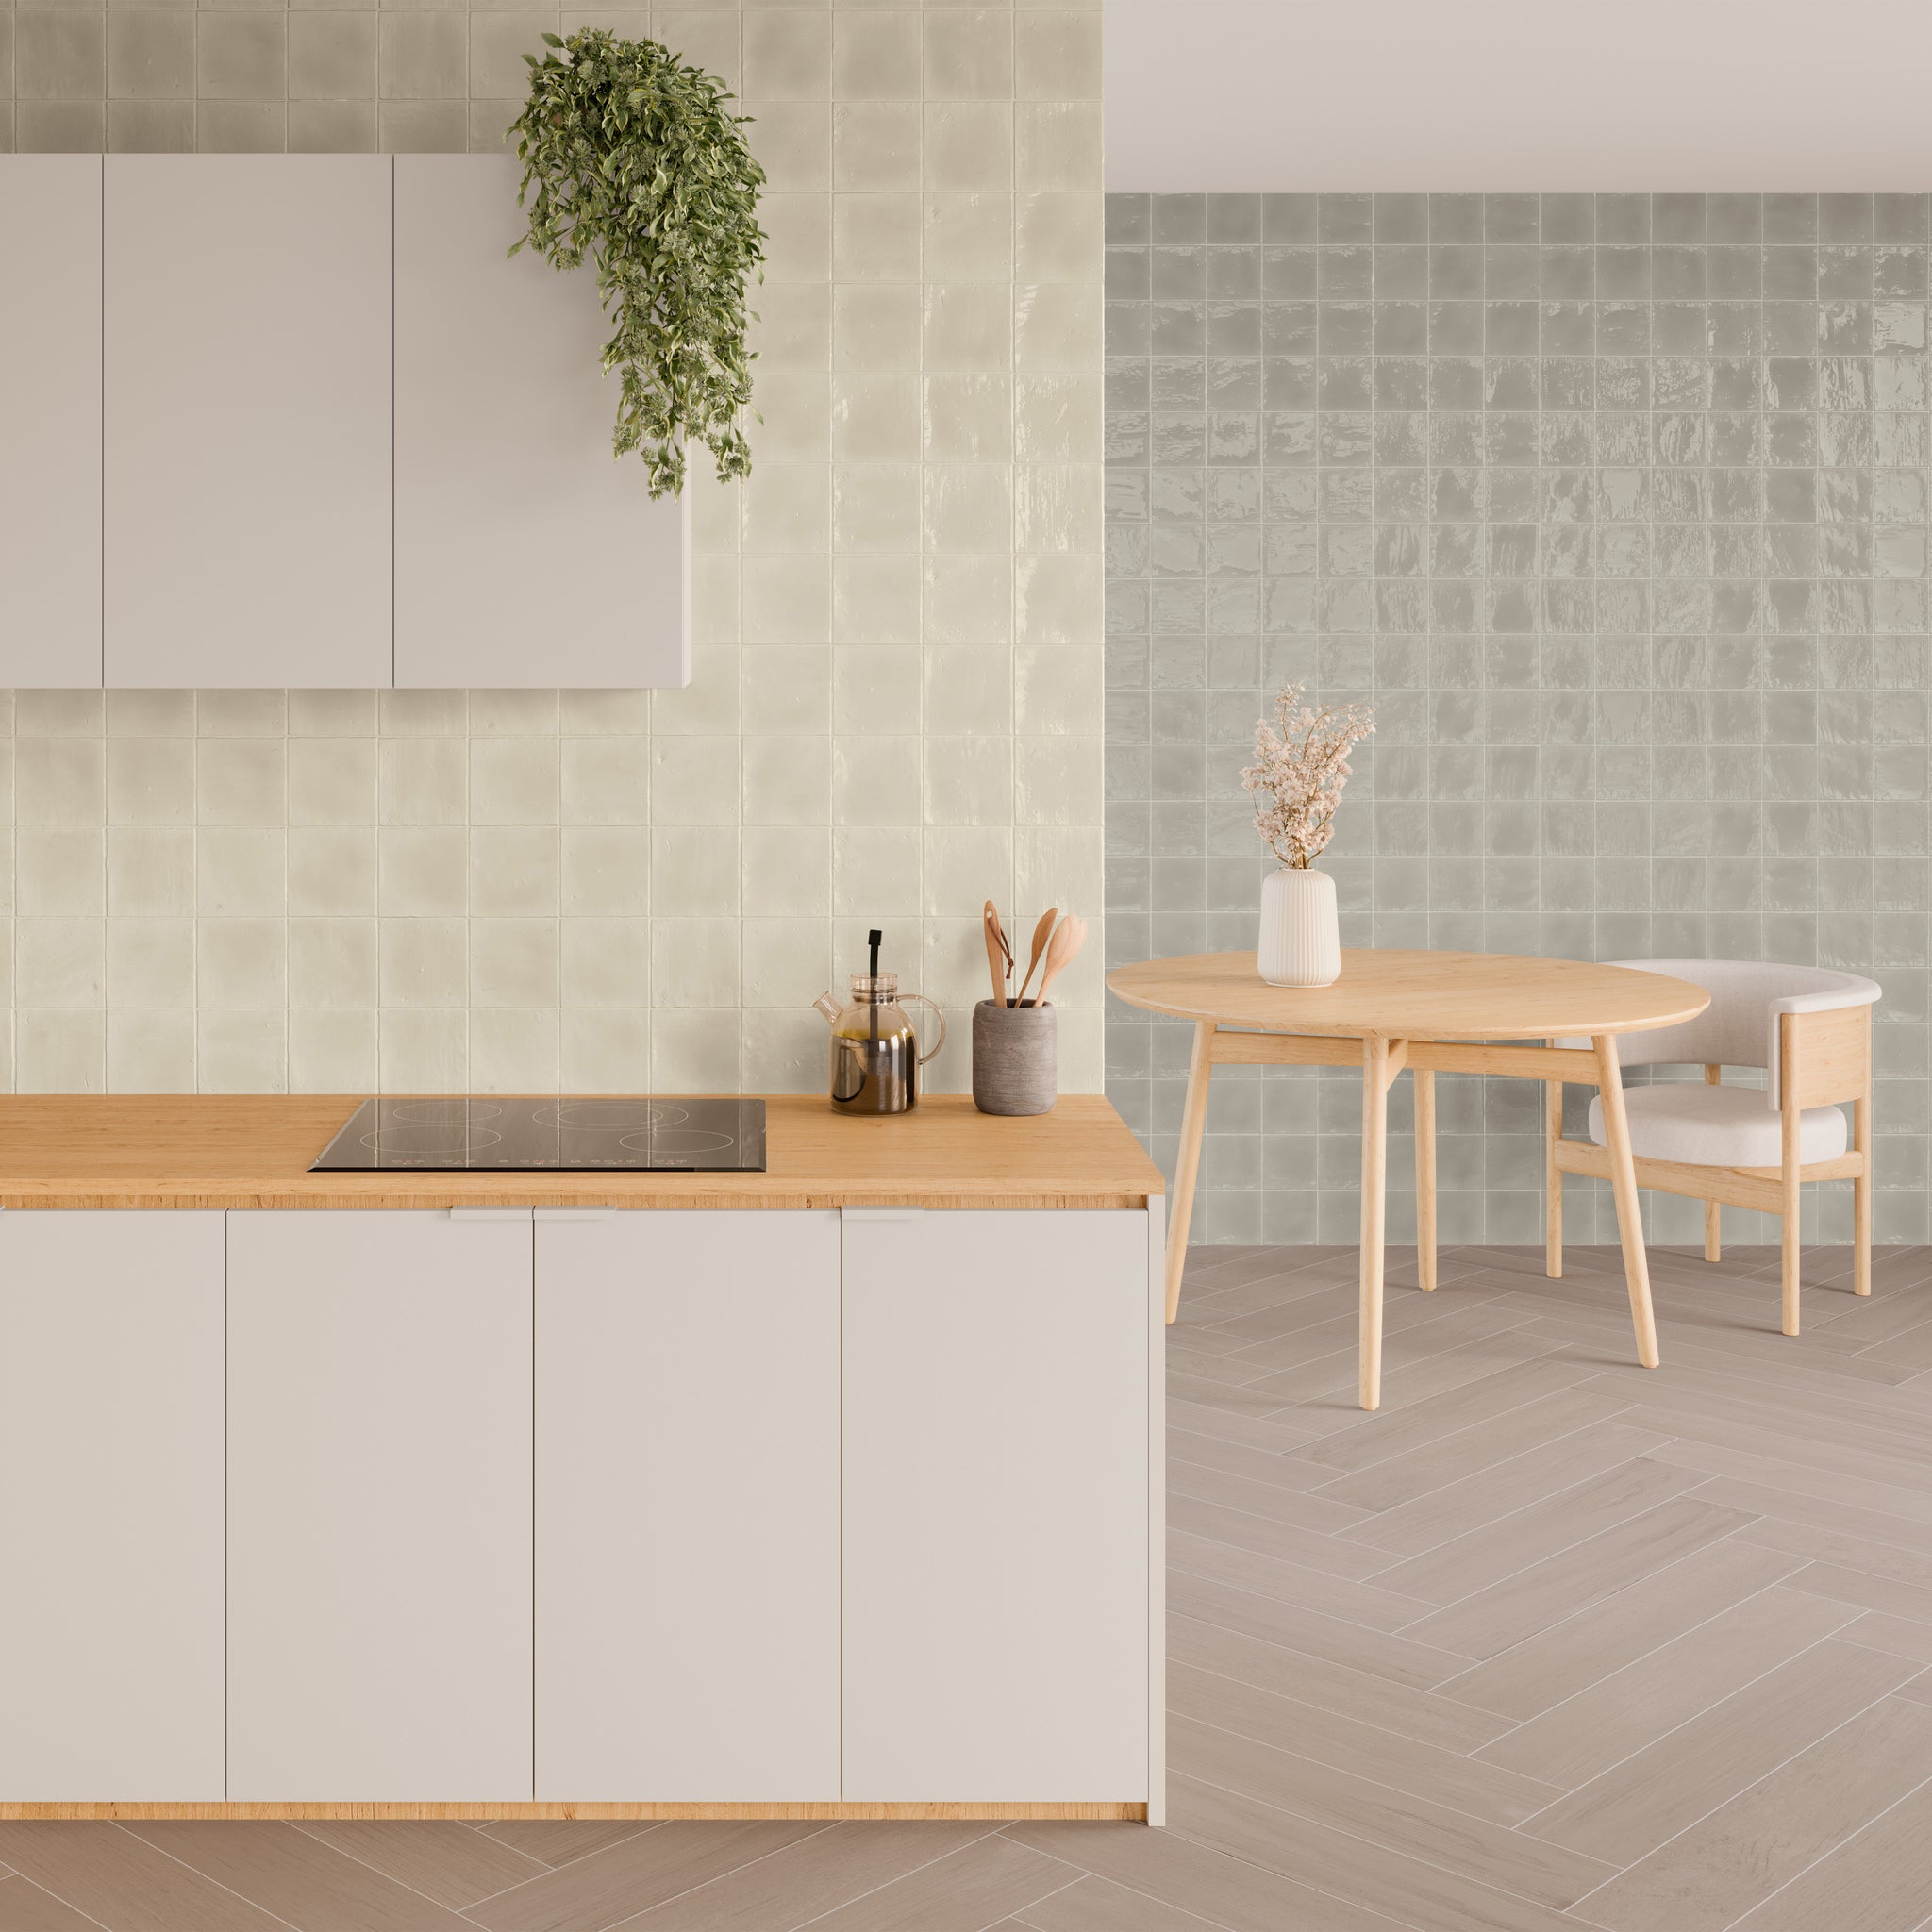 Cuisine Taupe / Taupe Kitchen